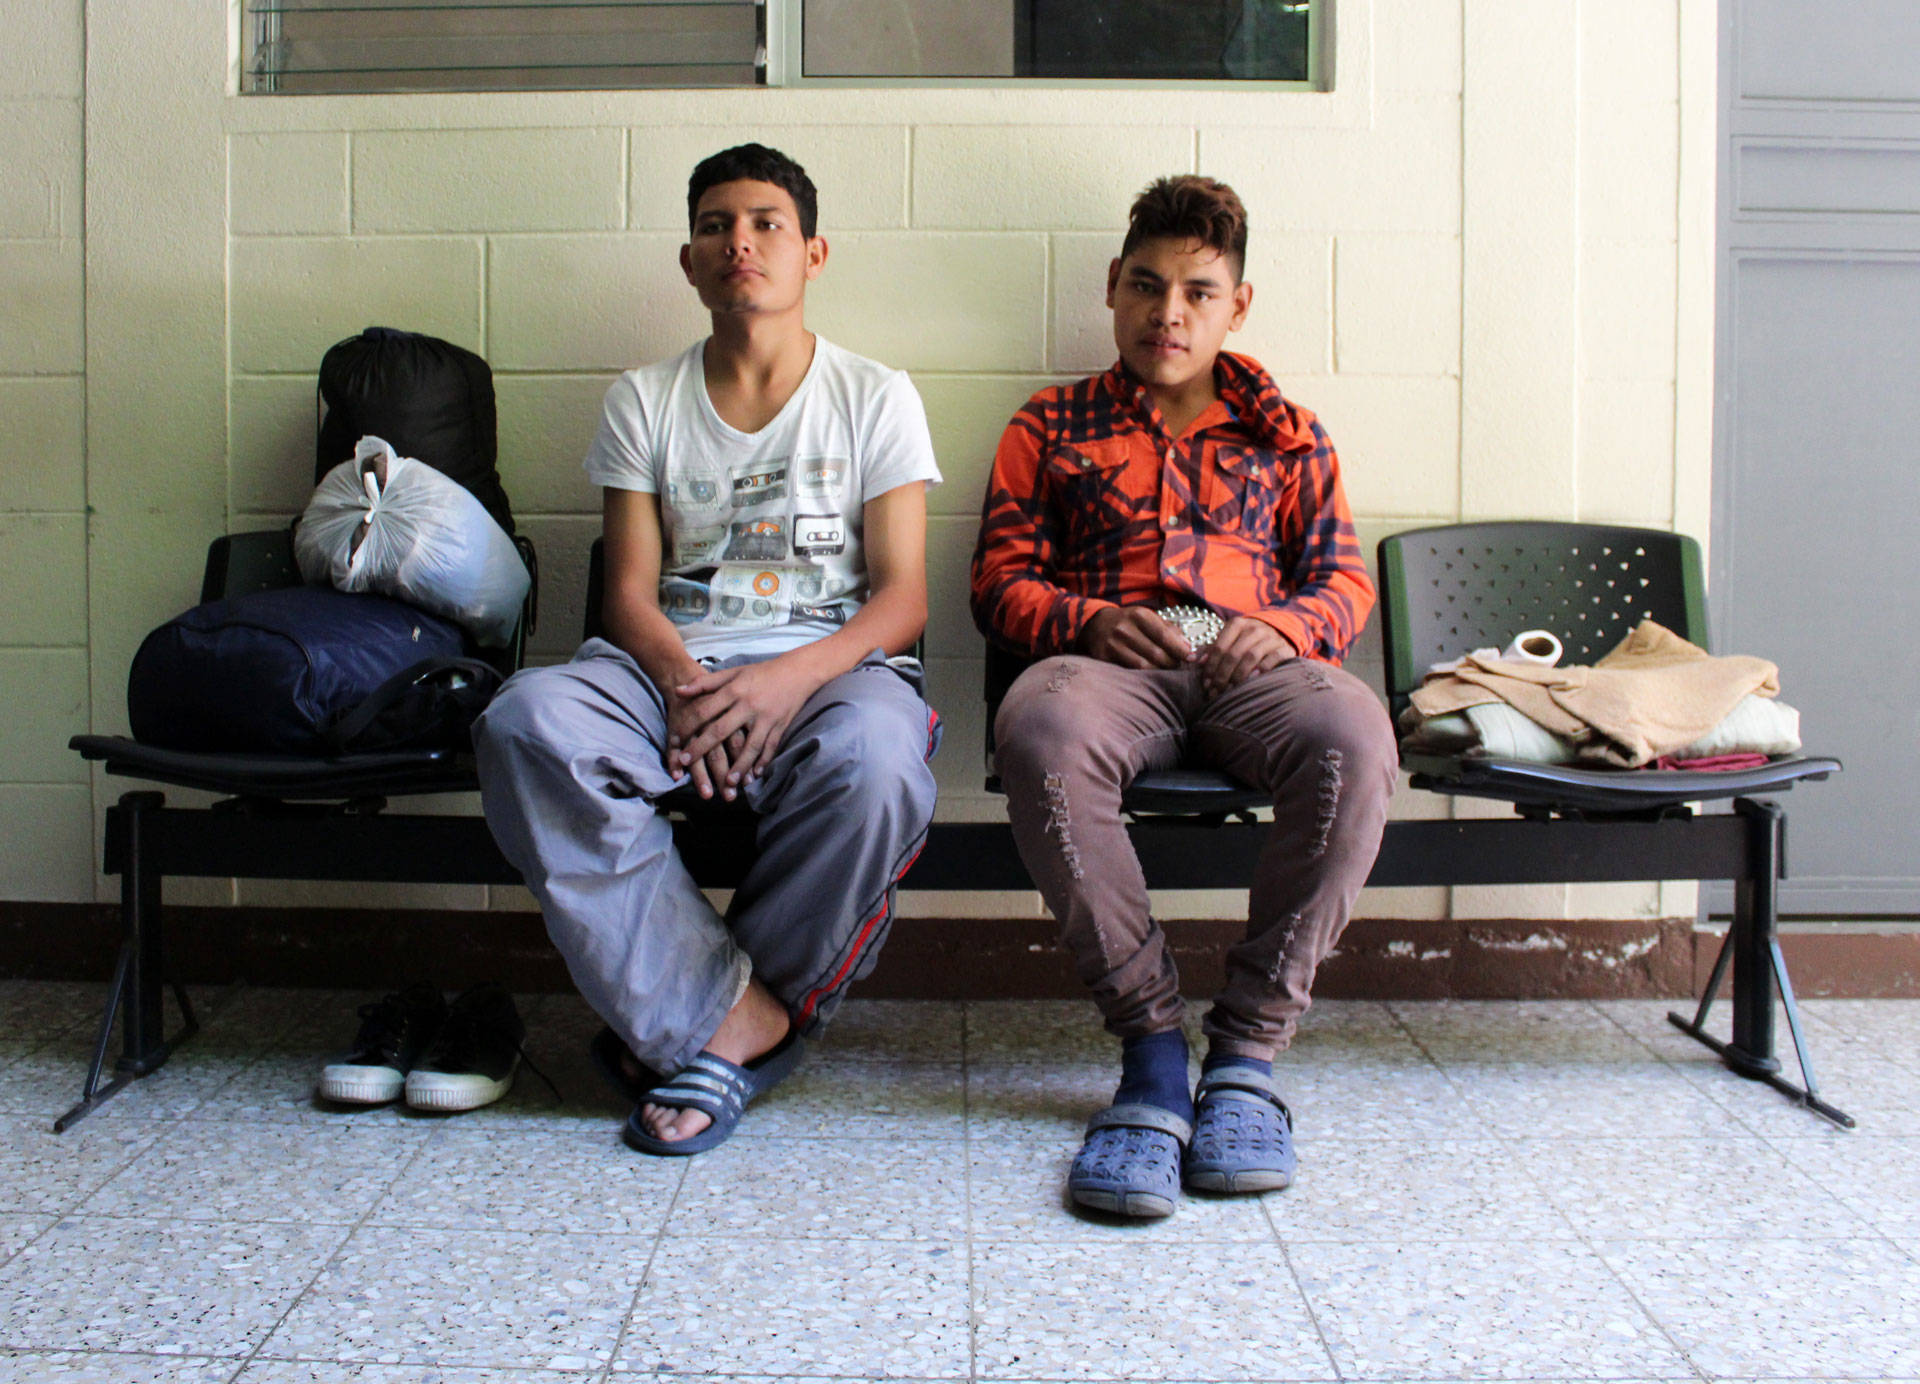 Two men wait for social services in Zona 1, Guatemala City. John Sepulvado/KQED